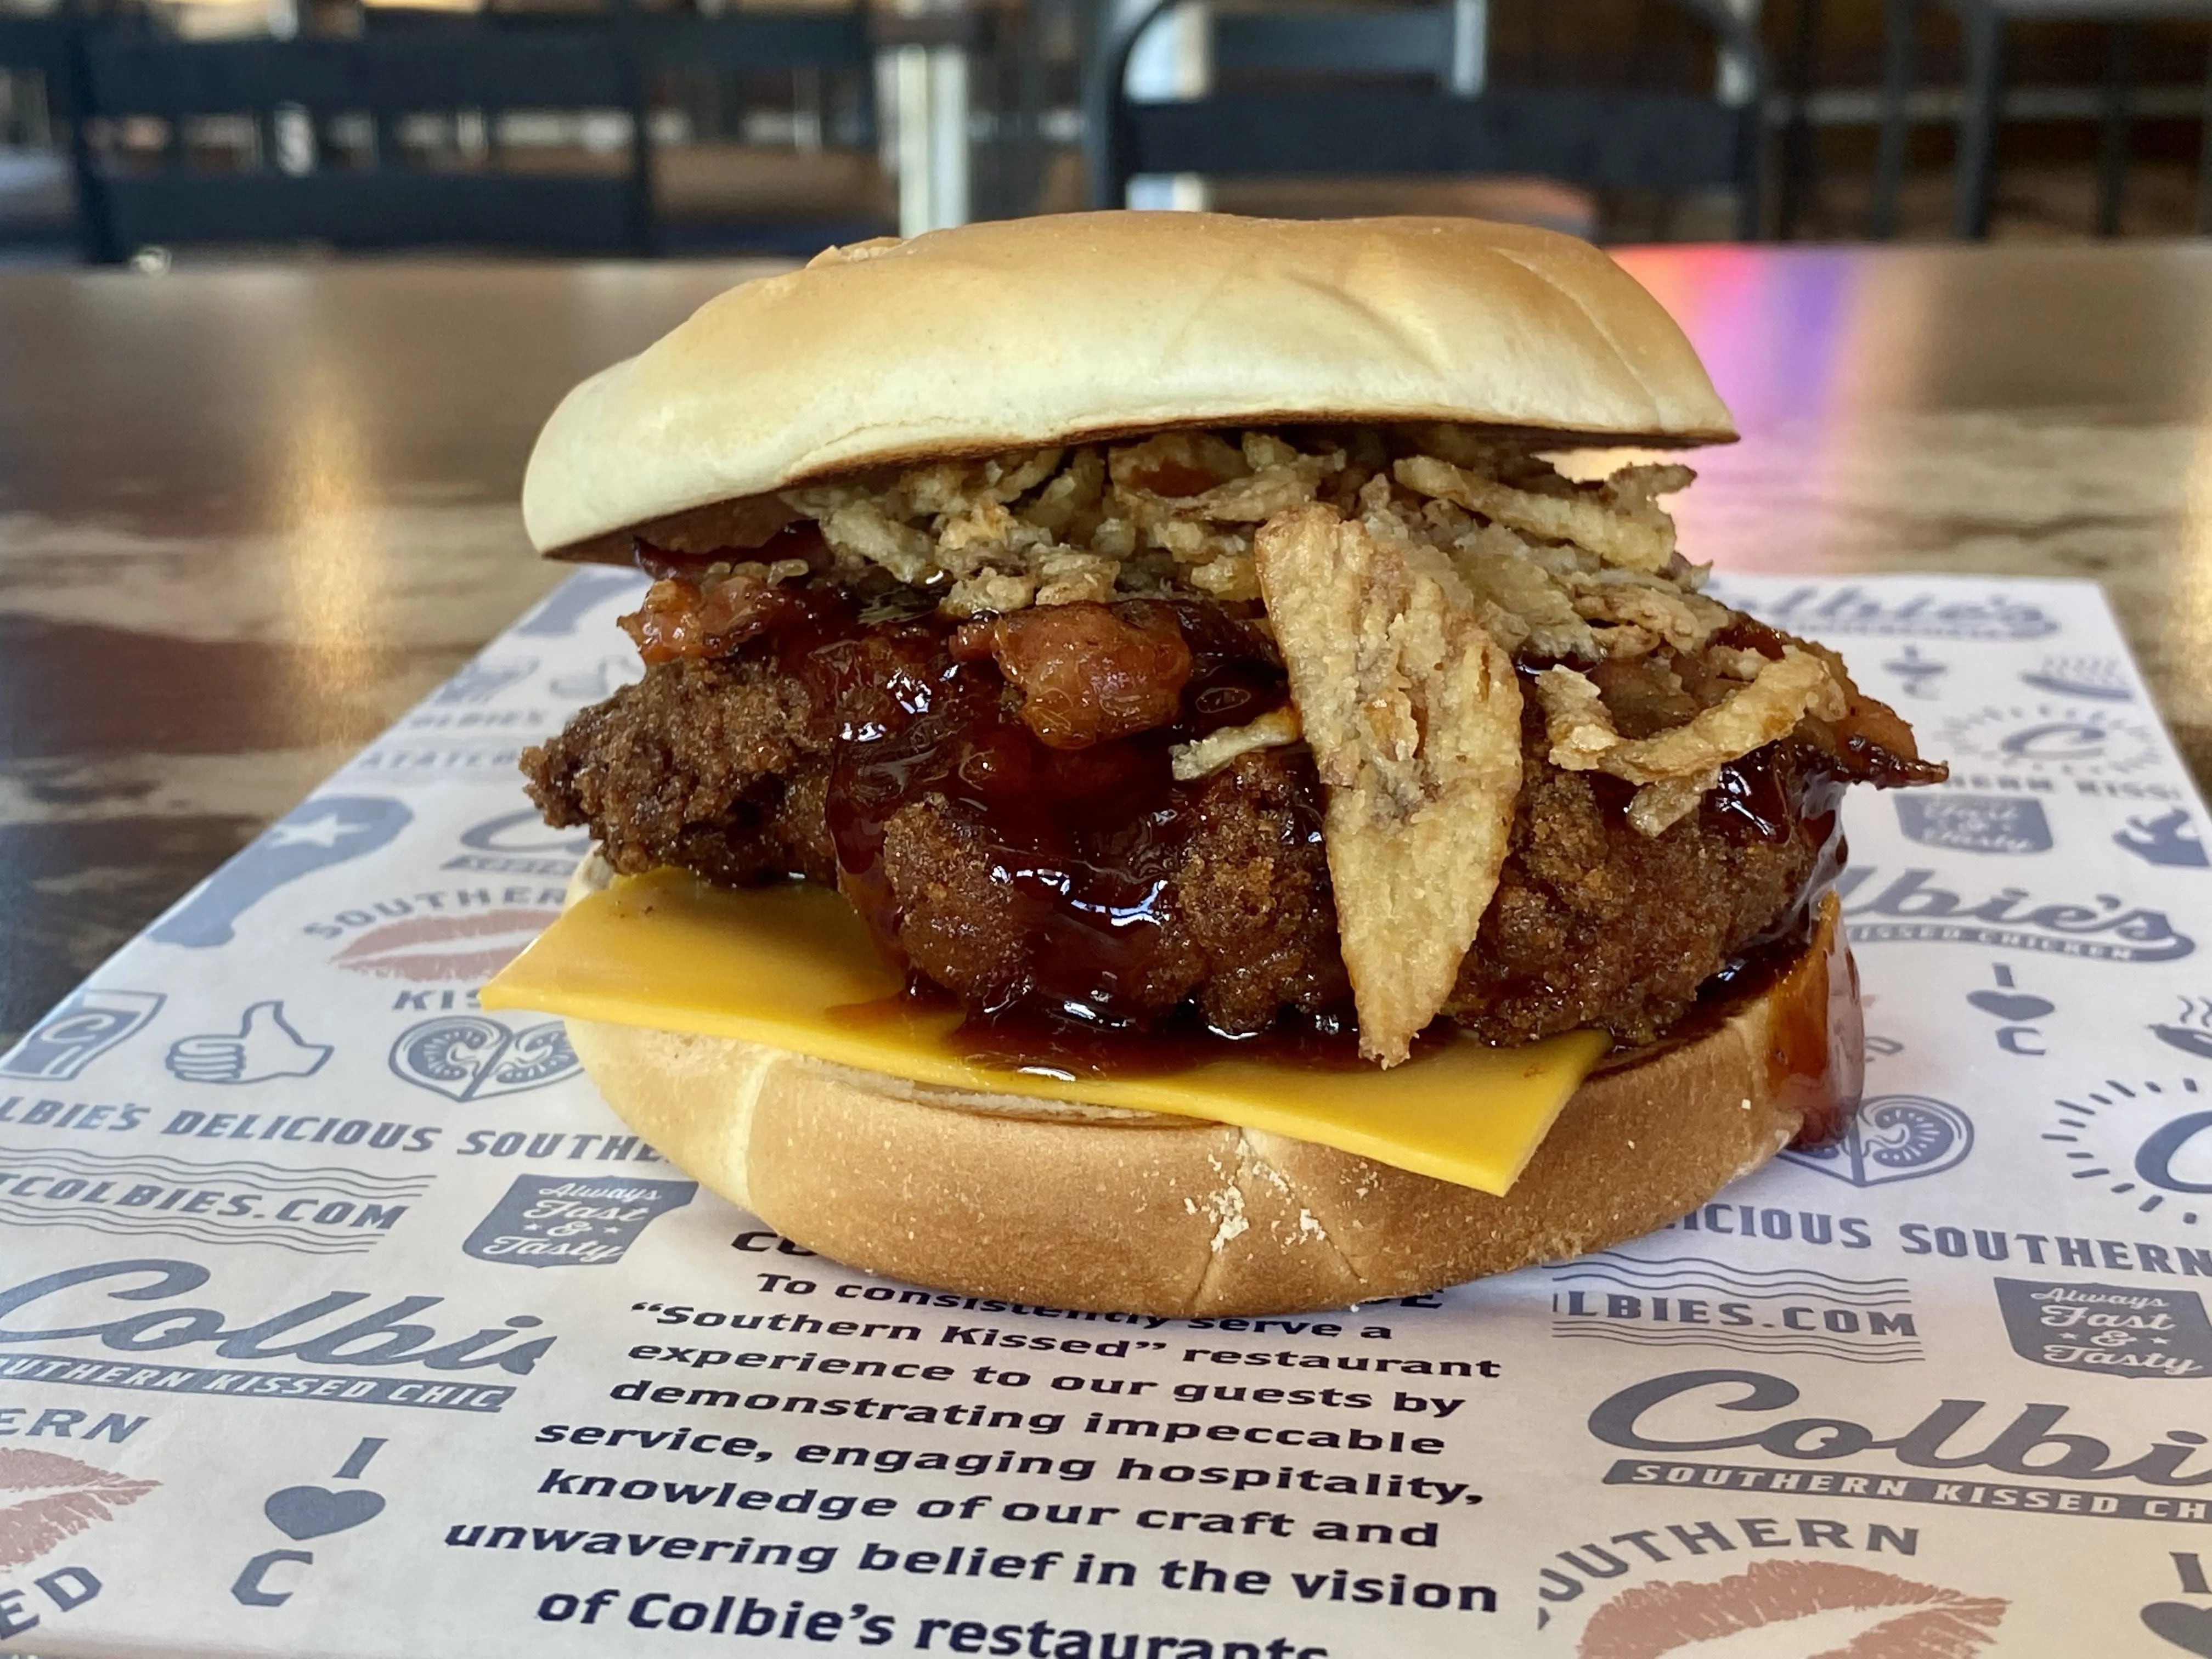 The PBJ Kiss sandwich at Colbie's Southern Kissed Chicken includes peanut sauce, grape jelly, candied bacon, and frizzled onions on a sweet Hawaiian bun.